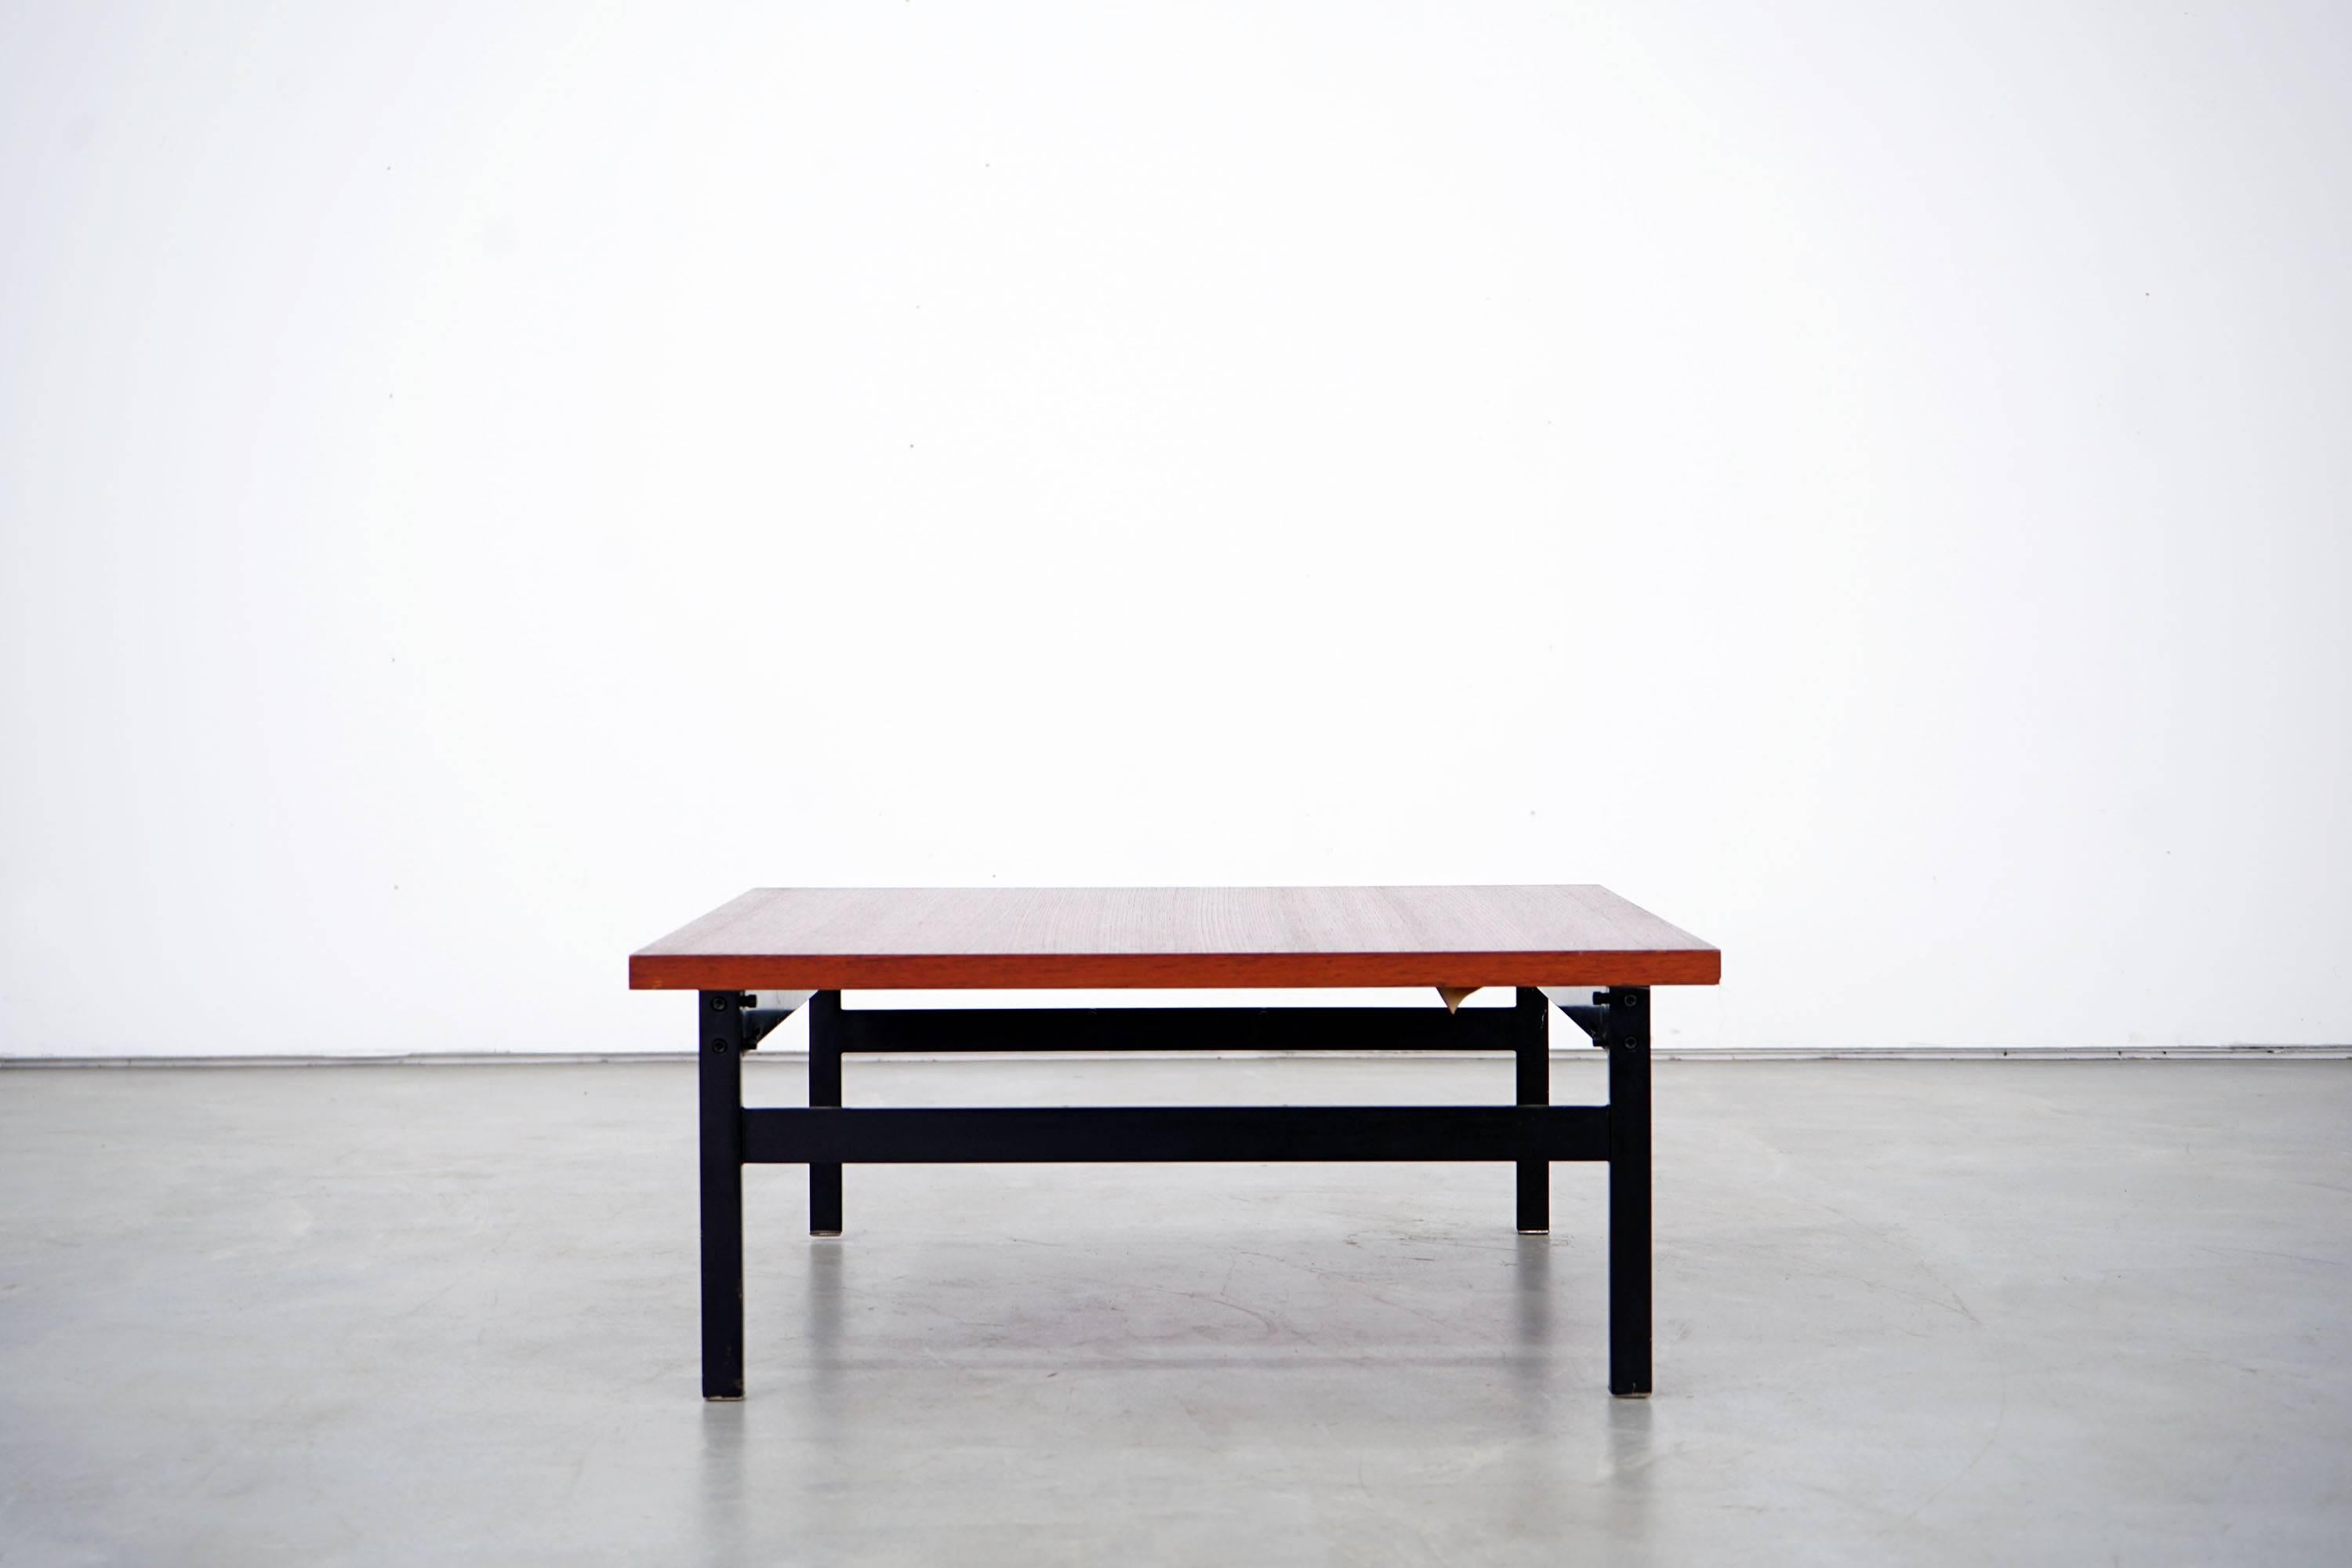 Dieter Wäckerlin designed this square teak and steel coffee table in the 1960s. The table was made by Idealheim. Accordingly, it is of very high quality. The teak wood used exhibits a beautiful texture. The item is in very good condition.